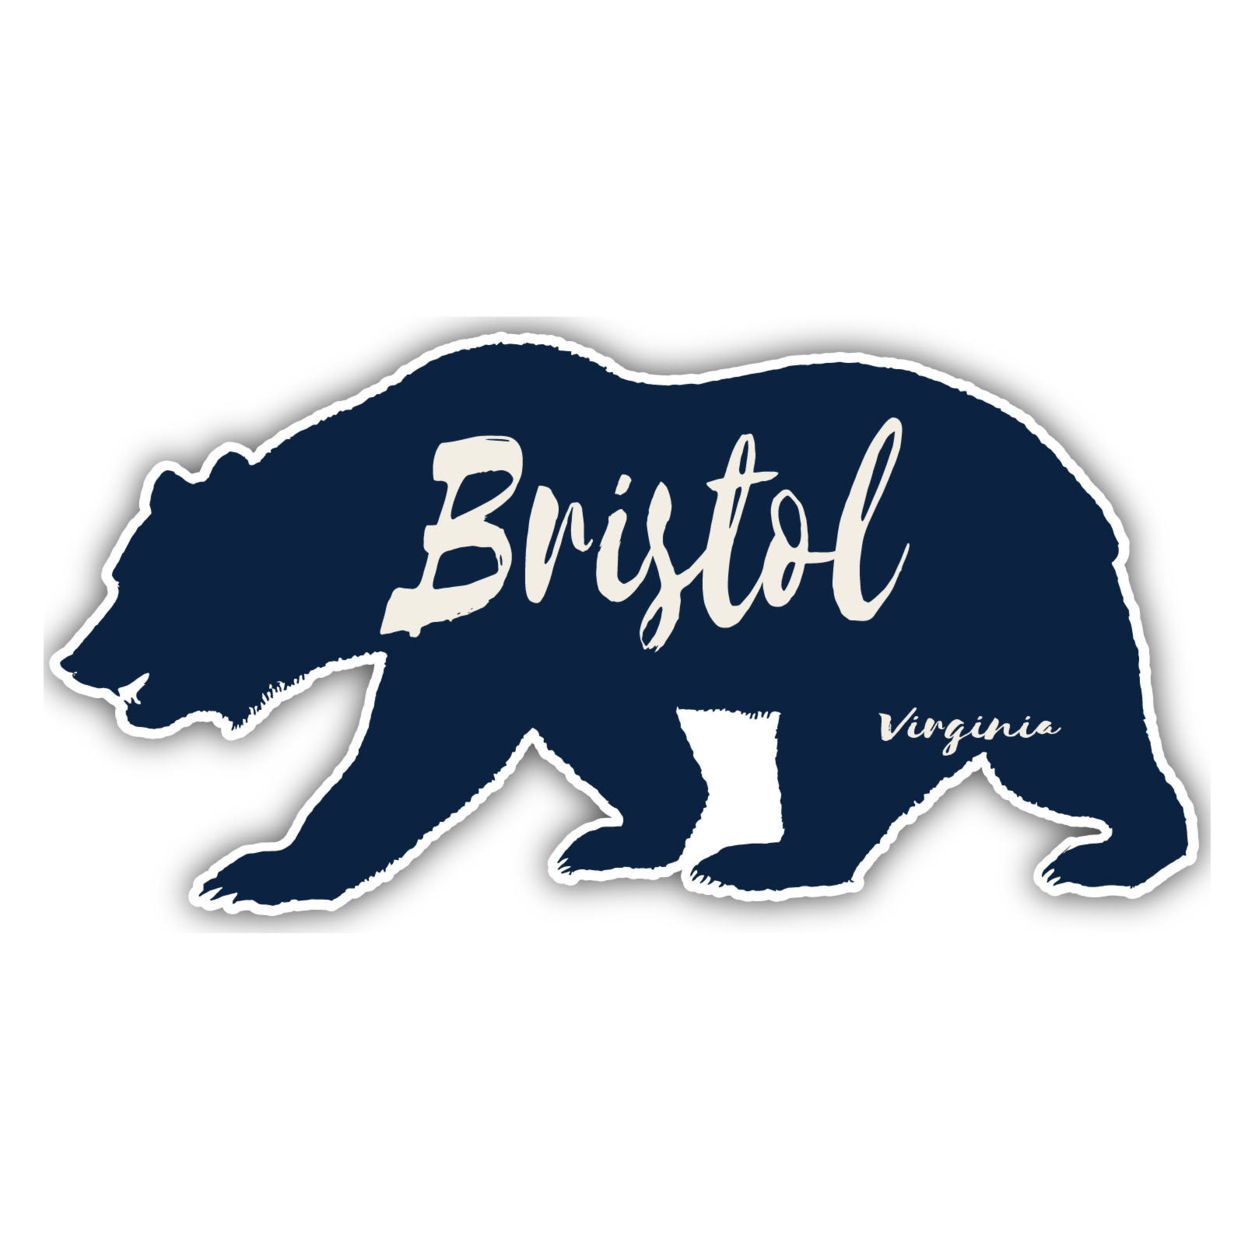 Bristol Virginia Souvenir Decorative Stickers (Choose Theme And Size) - 4-Pack, 12-Inch, Great Outdoors